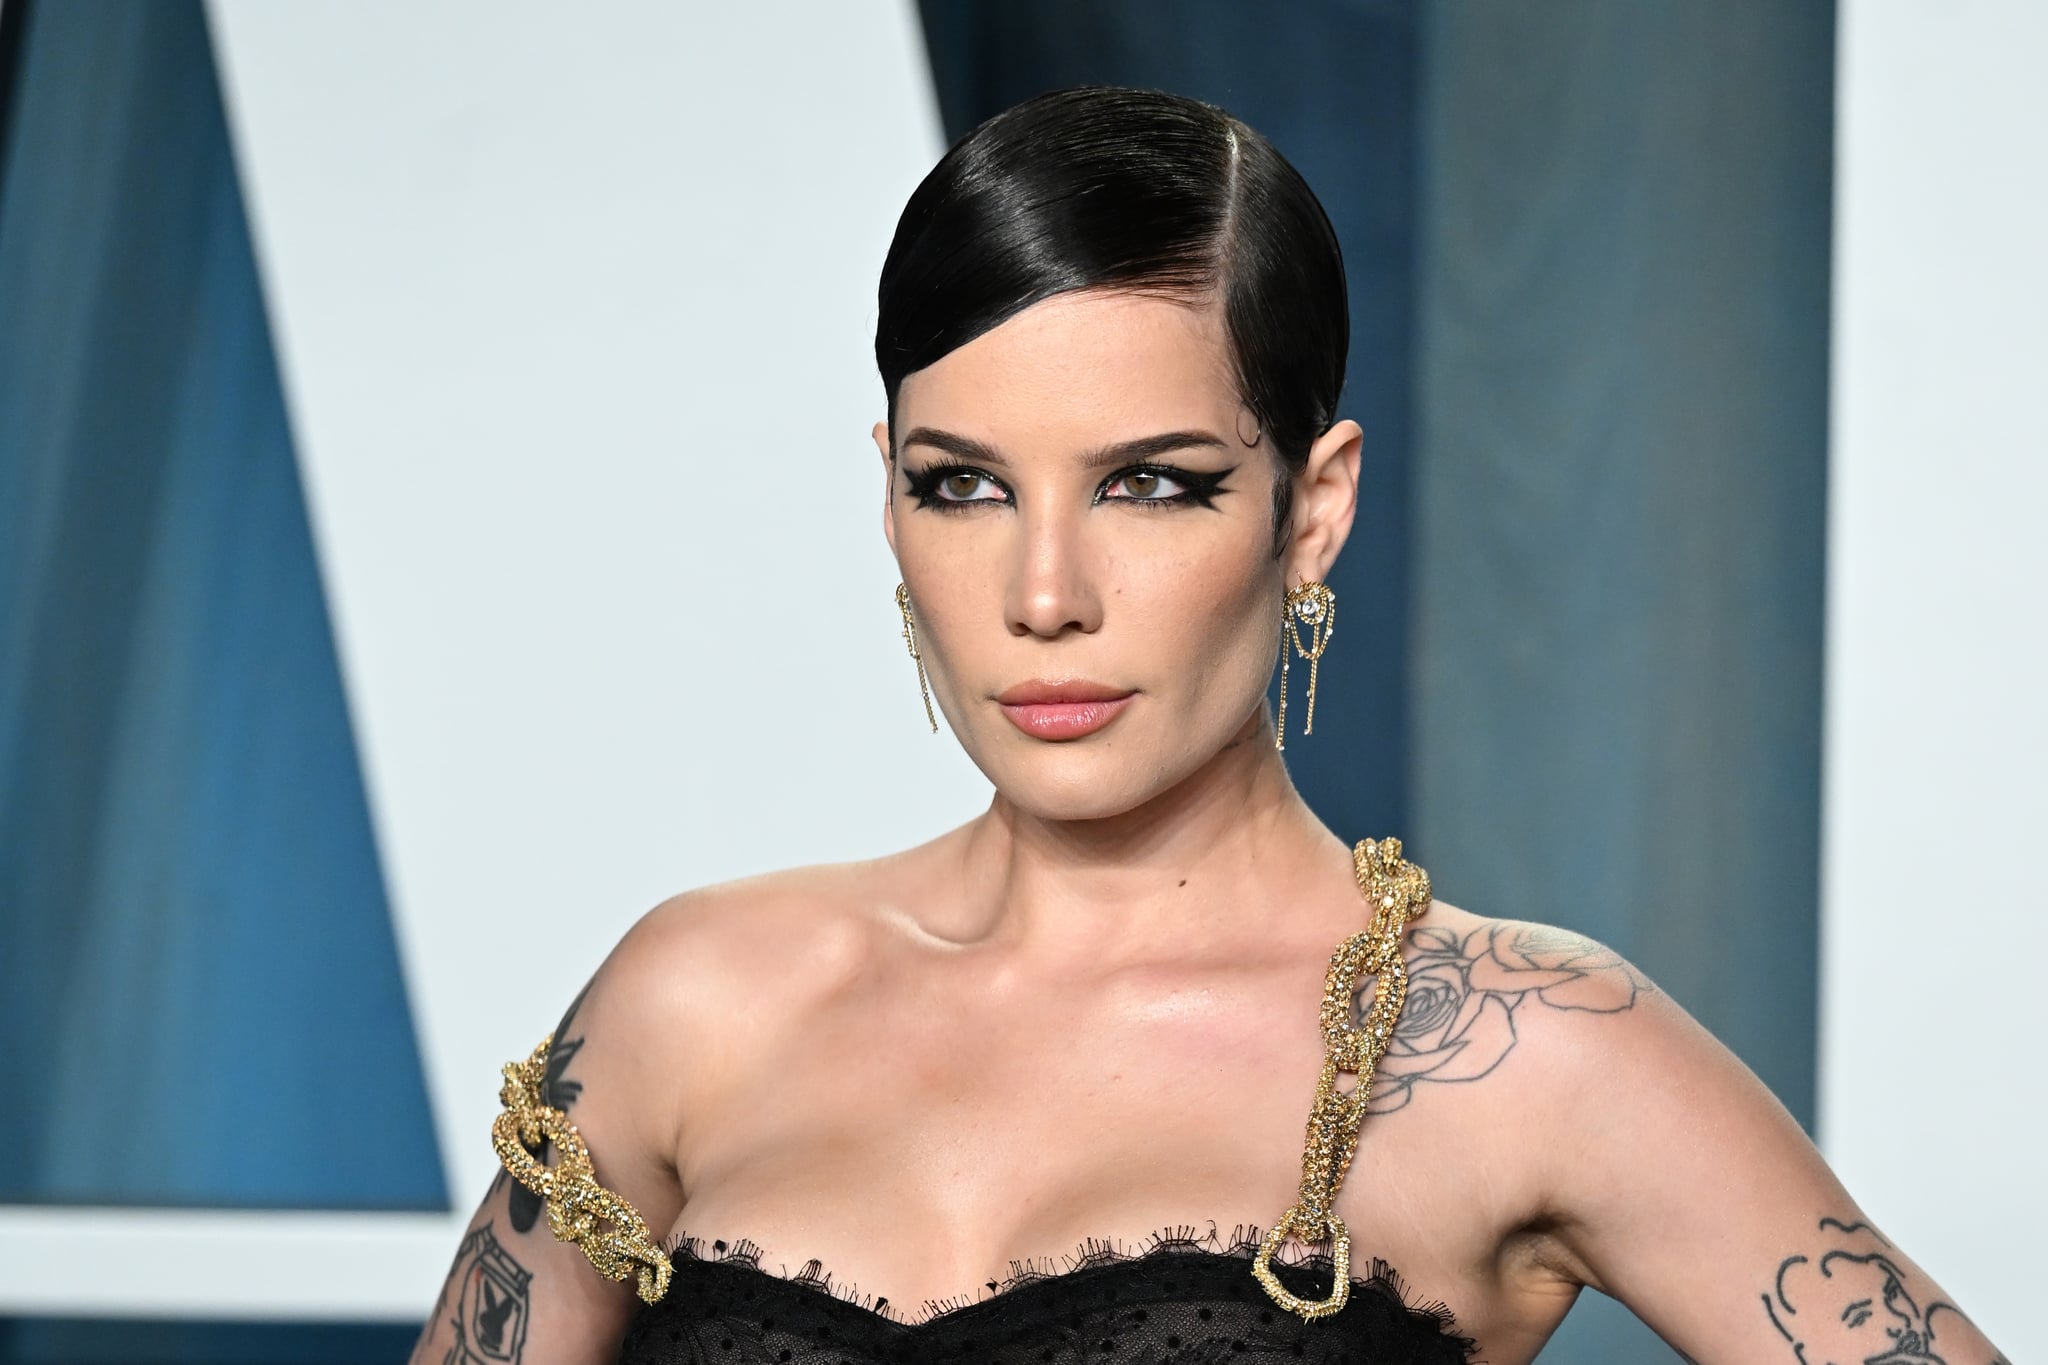 BEVERLY HILLS, CALIFORNIA - MARCH 27: Halsey attends 2022 Vanity Fair Oscar Party Hosted By Radhika Jones at Wallis Annenberg Center for the Performing Arts on March 27, 2022 in Beverly Hills, California. (Photo by Daniele Venturelli/WireImage)